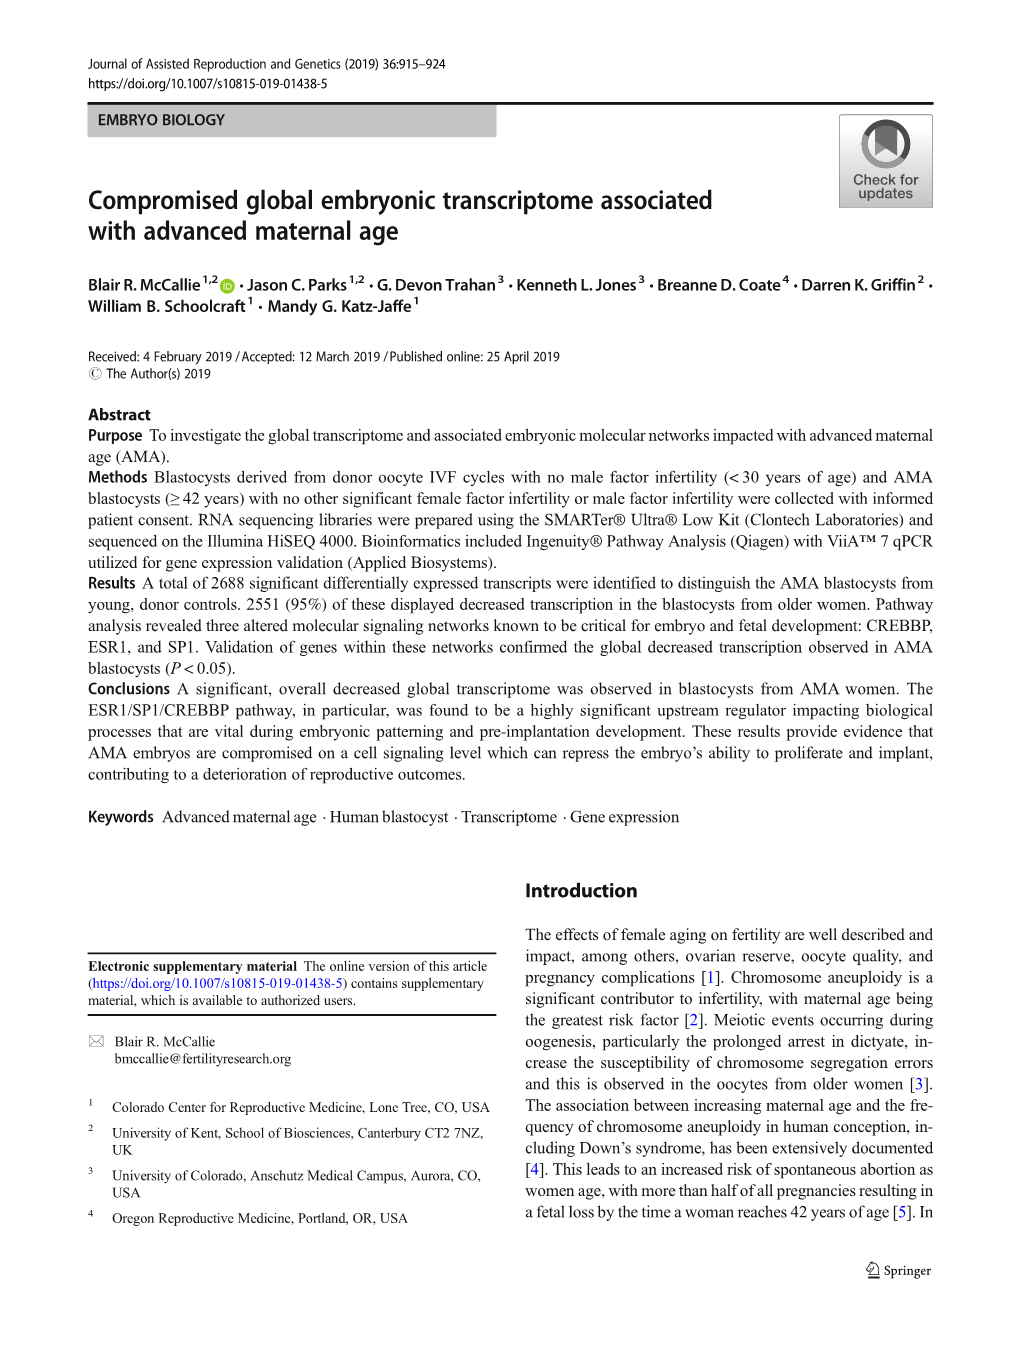 Compromised Global Embryonic Transcriptome Associated with Advanced Maternal Age